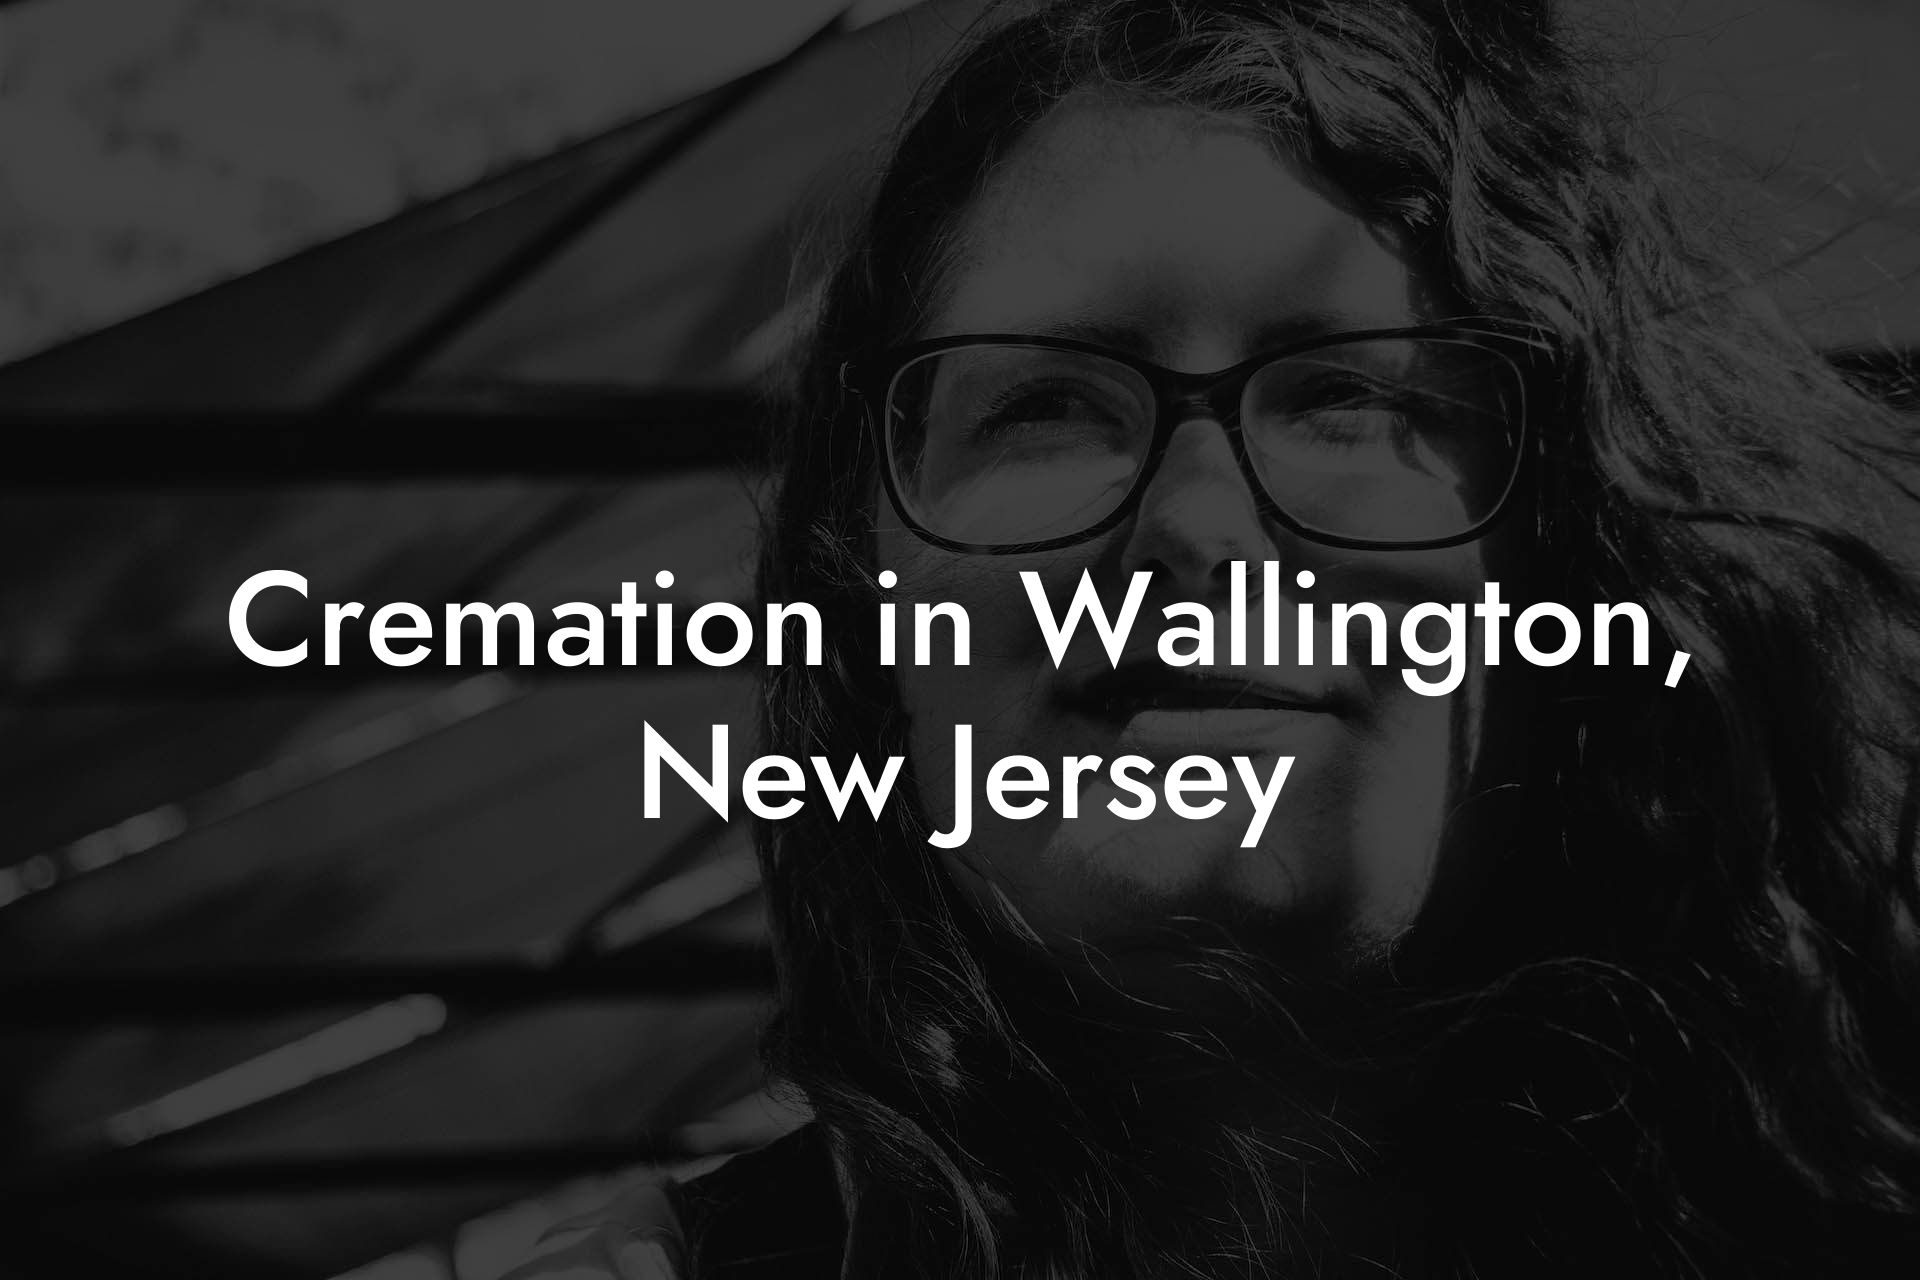 Cremation in Wallington, New Jersey